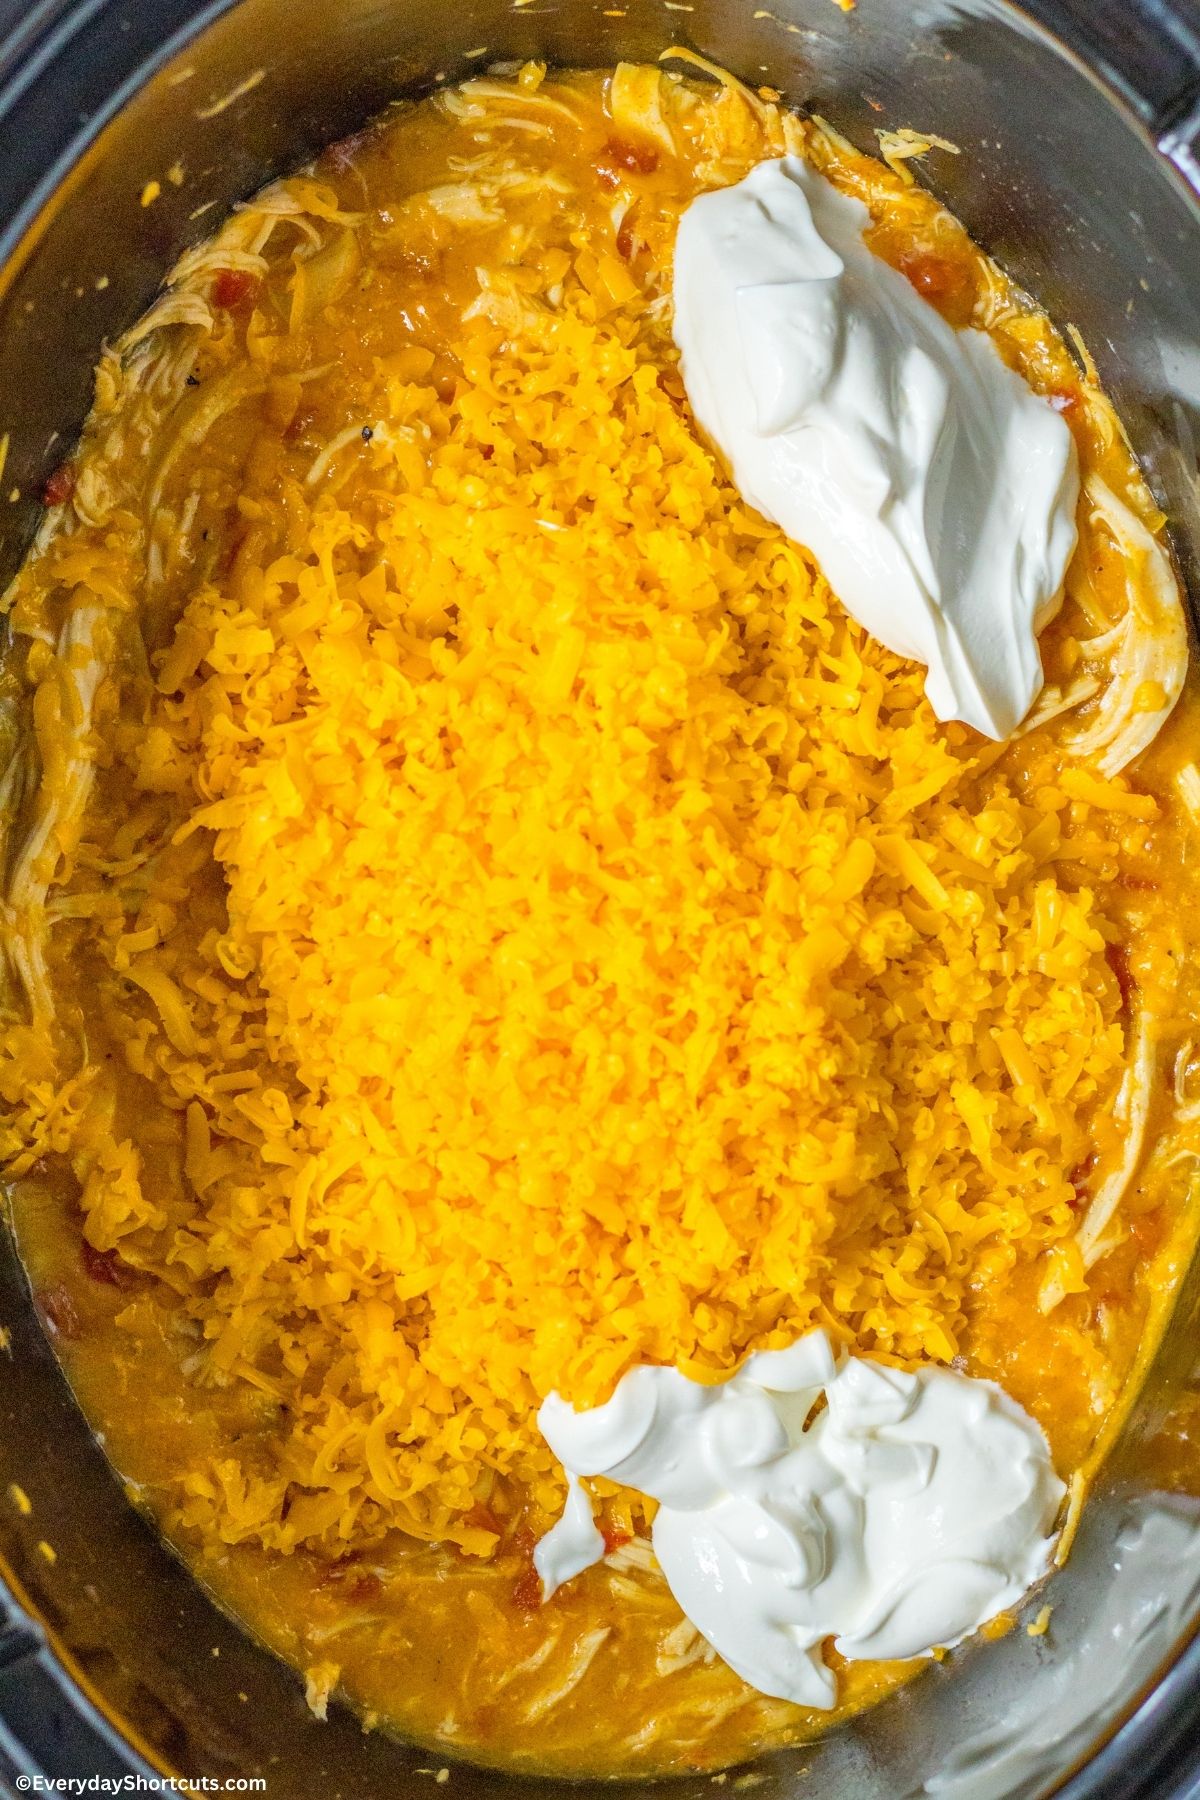 shredded cheese and sour cream on top of chicken in a crockpot